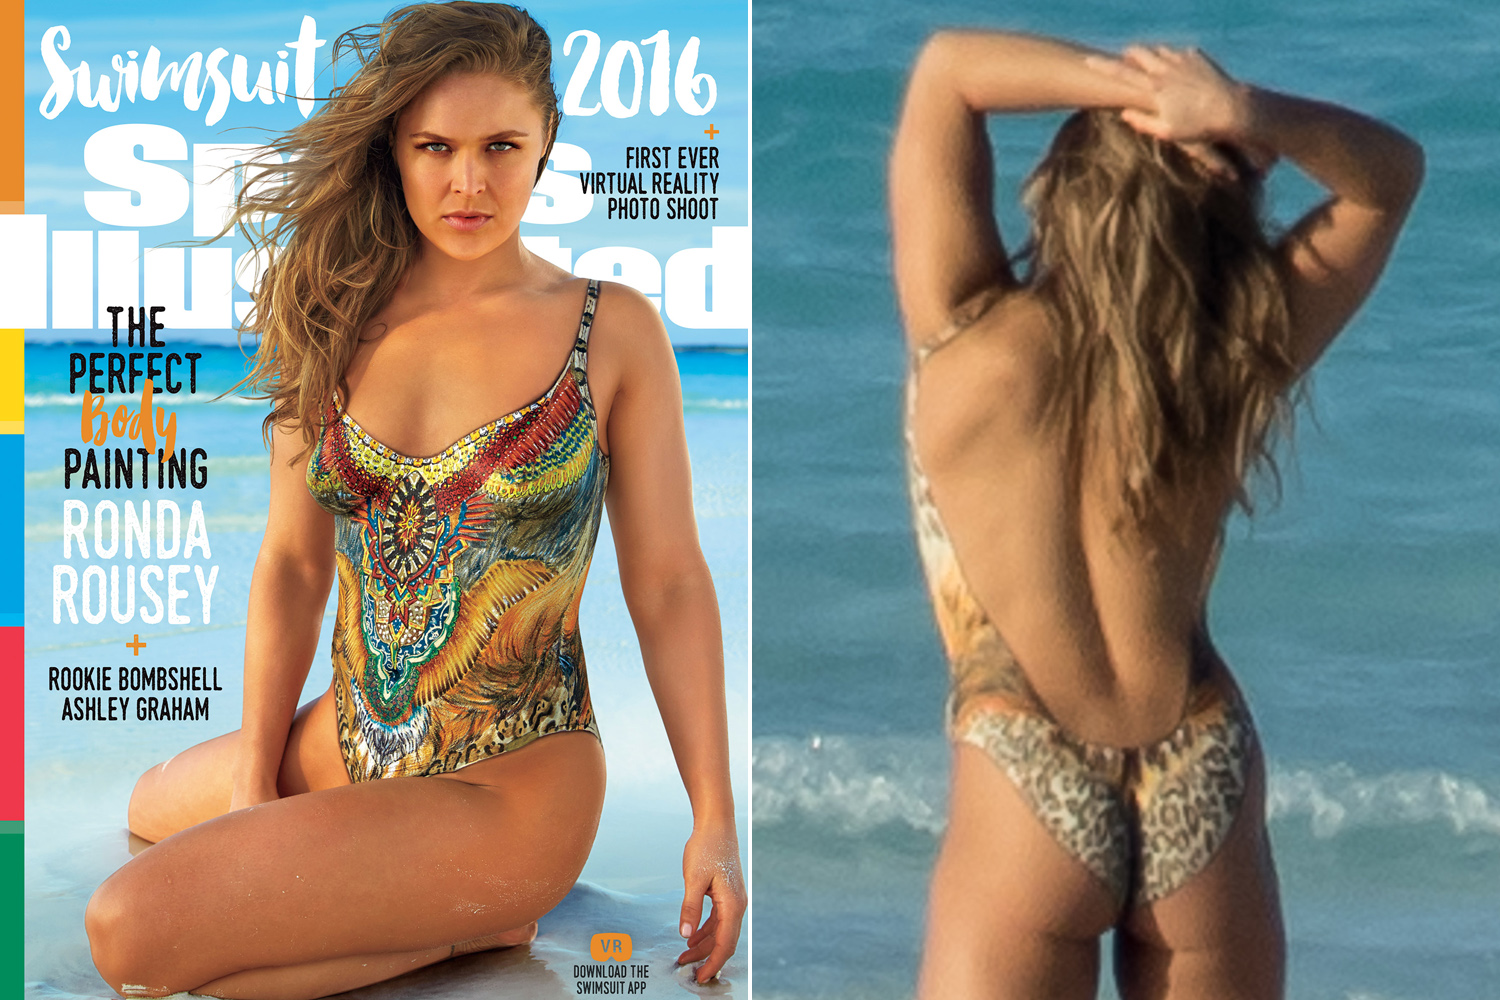 andrew curbelo recommends naked pictures ronda rousey pic